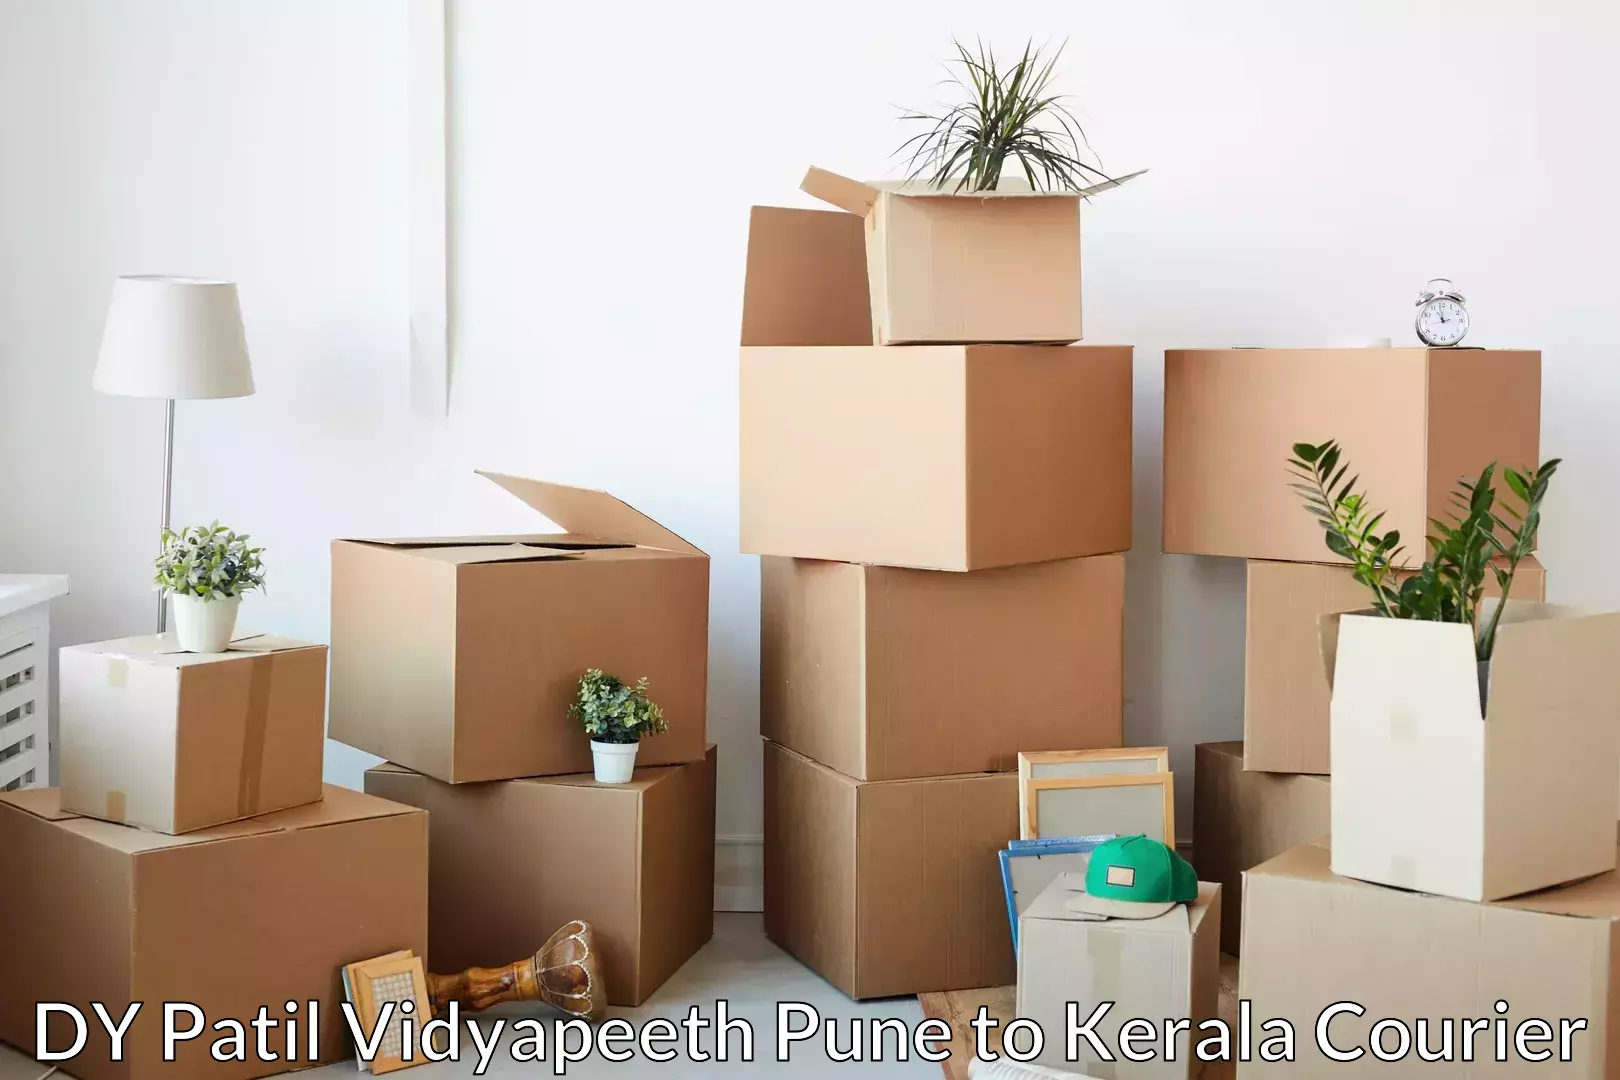 Quality relocation assistance DY Patil Vidyapeeth Pune to Kerala